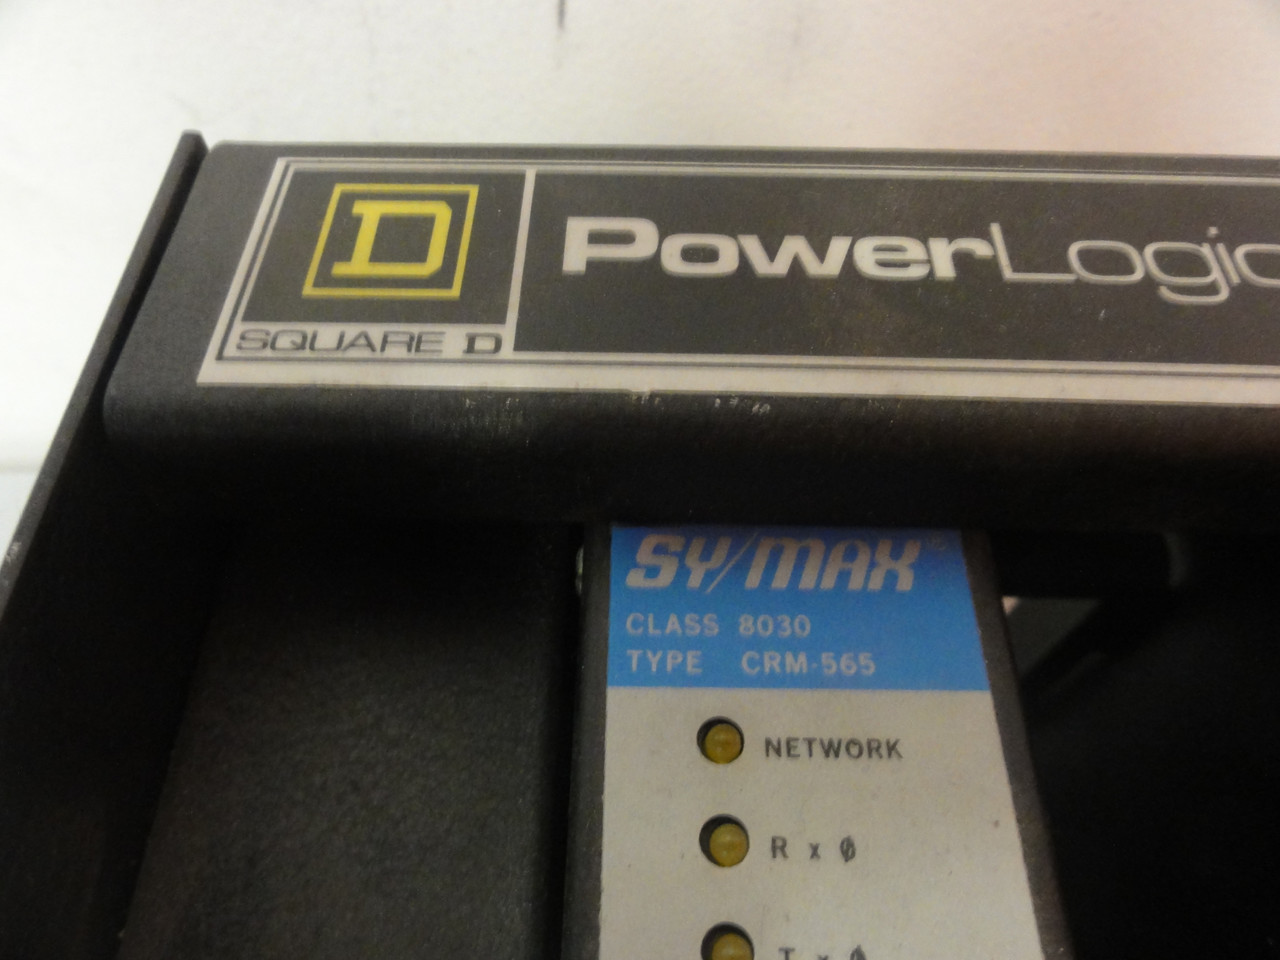 Square D Power Logic 3090 SRK-2 With Symax 8030 CRM 565